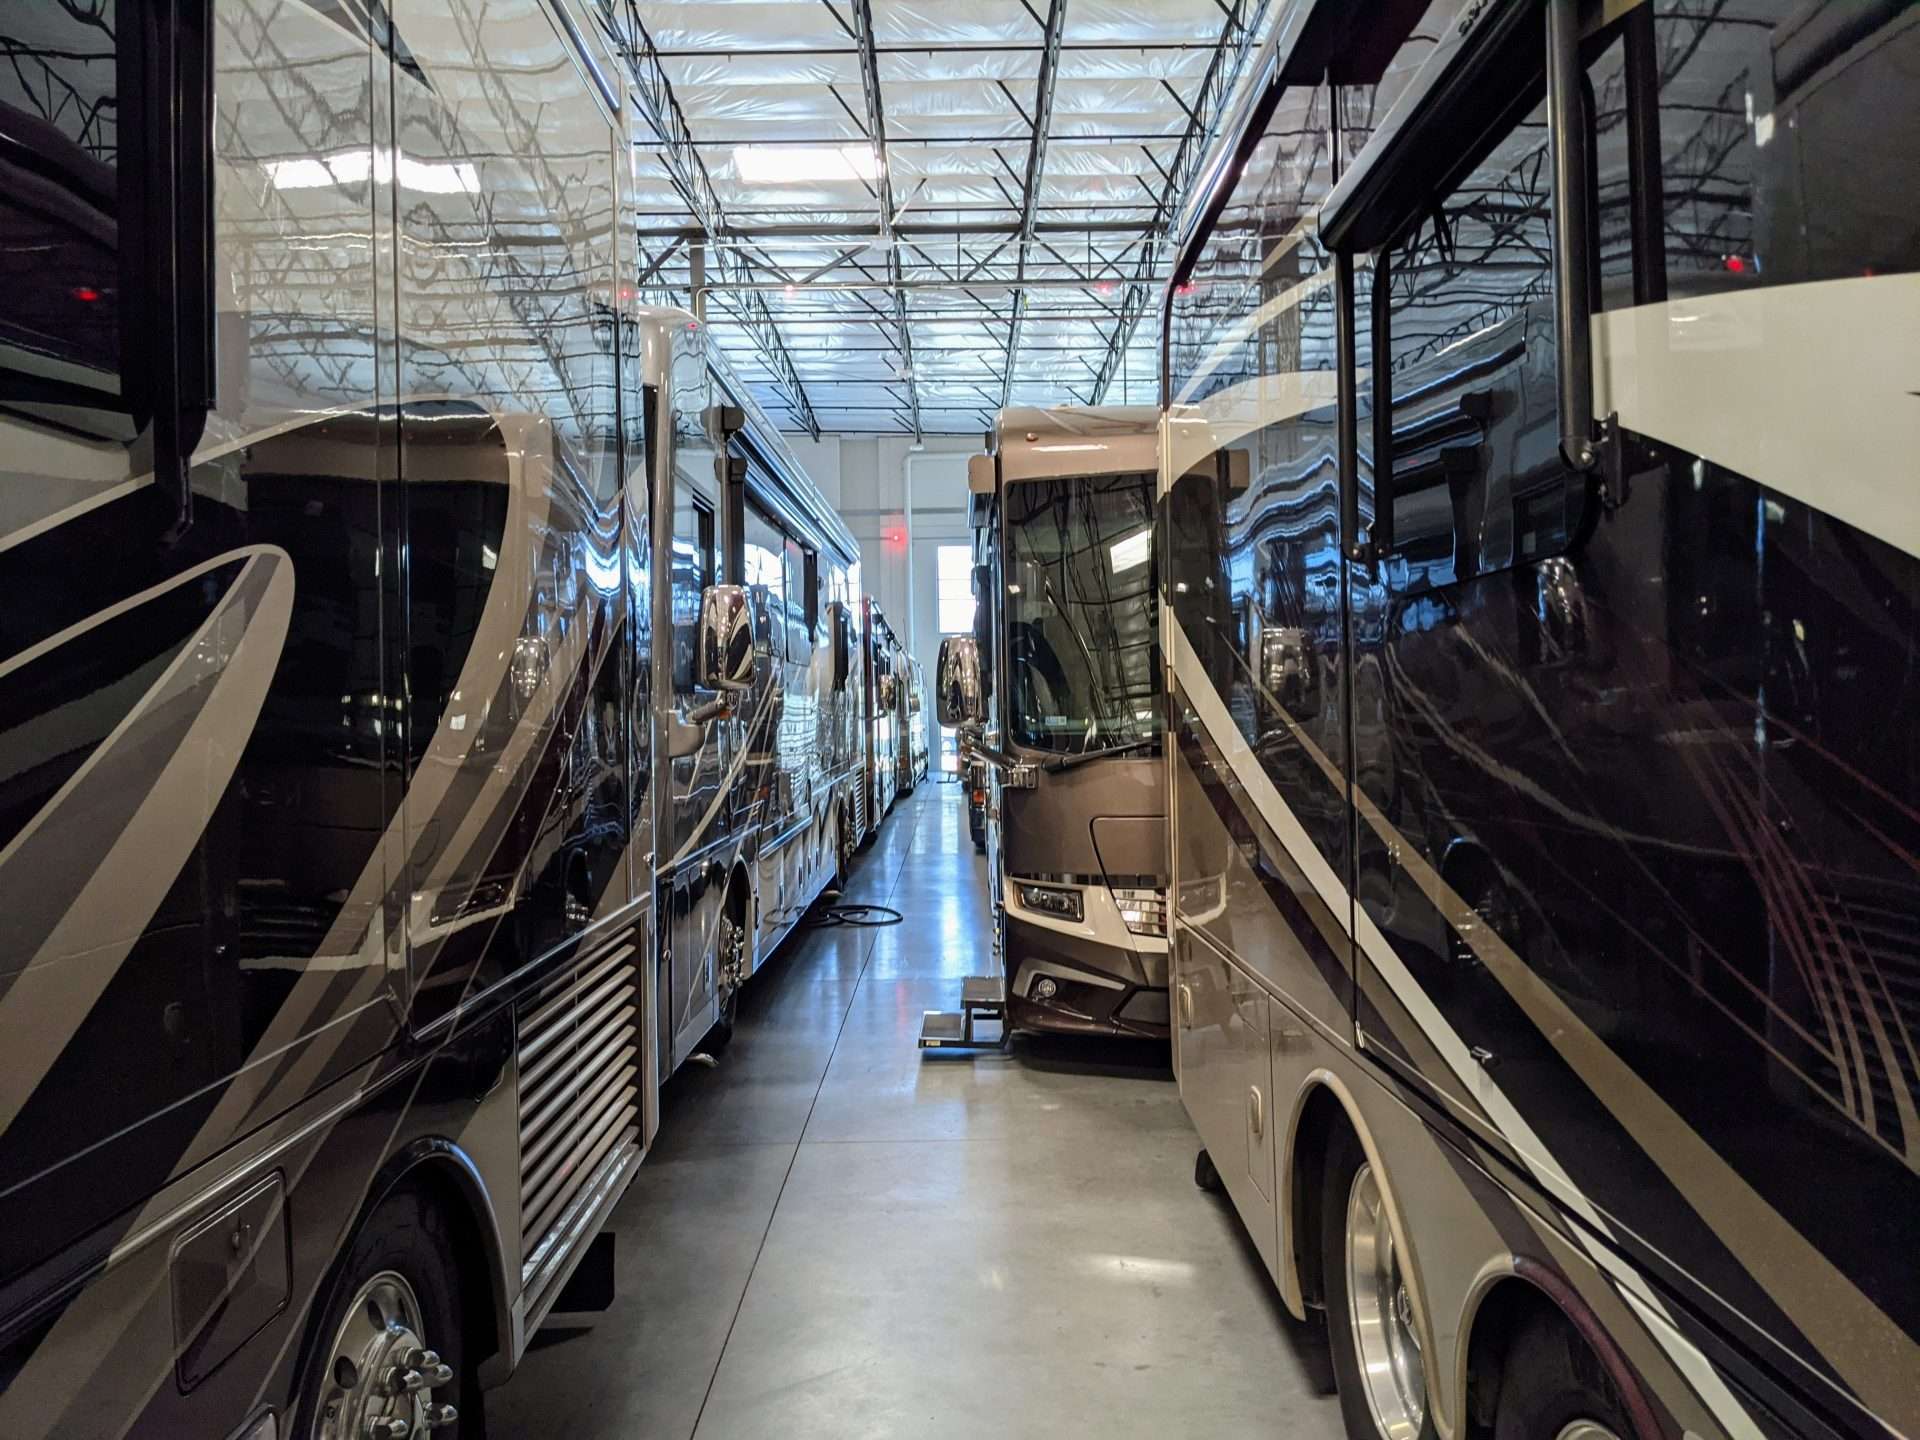 A bunch of Entegra motorhomes parked in warehouse.